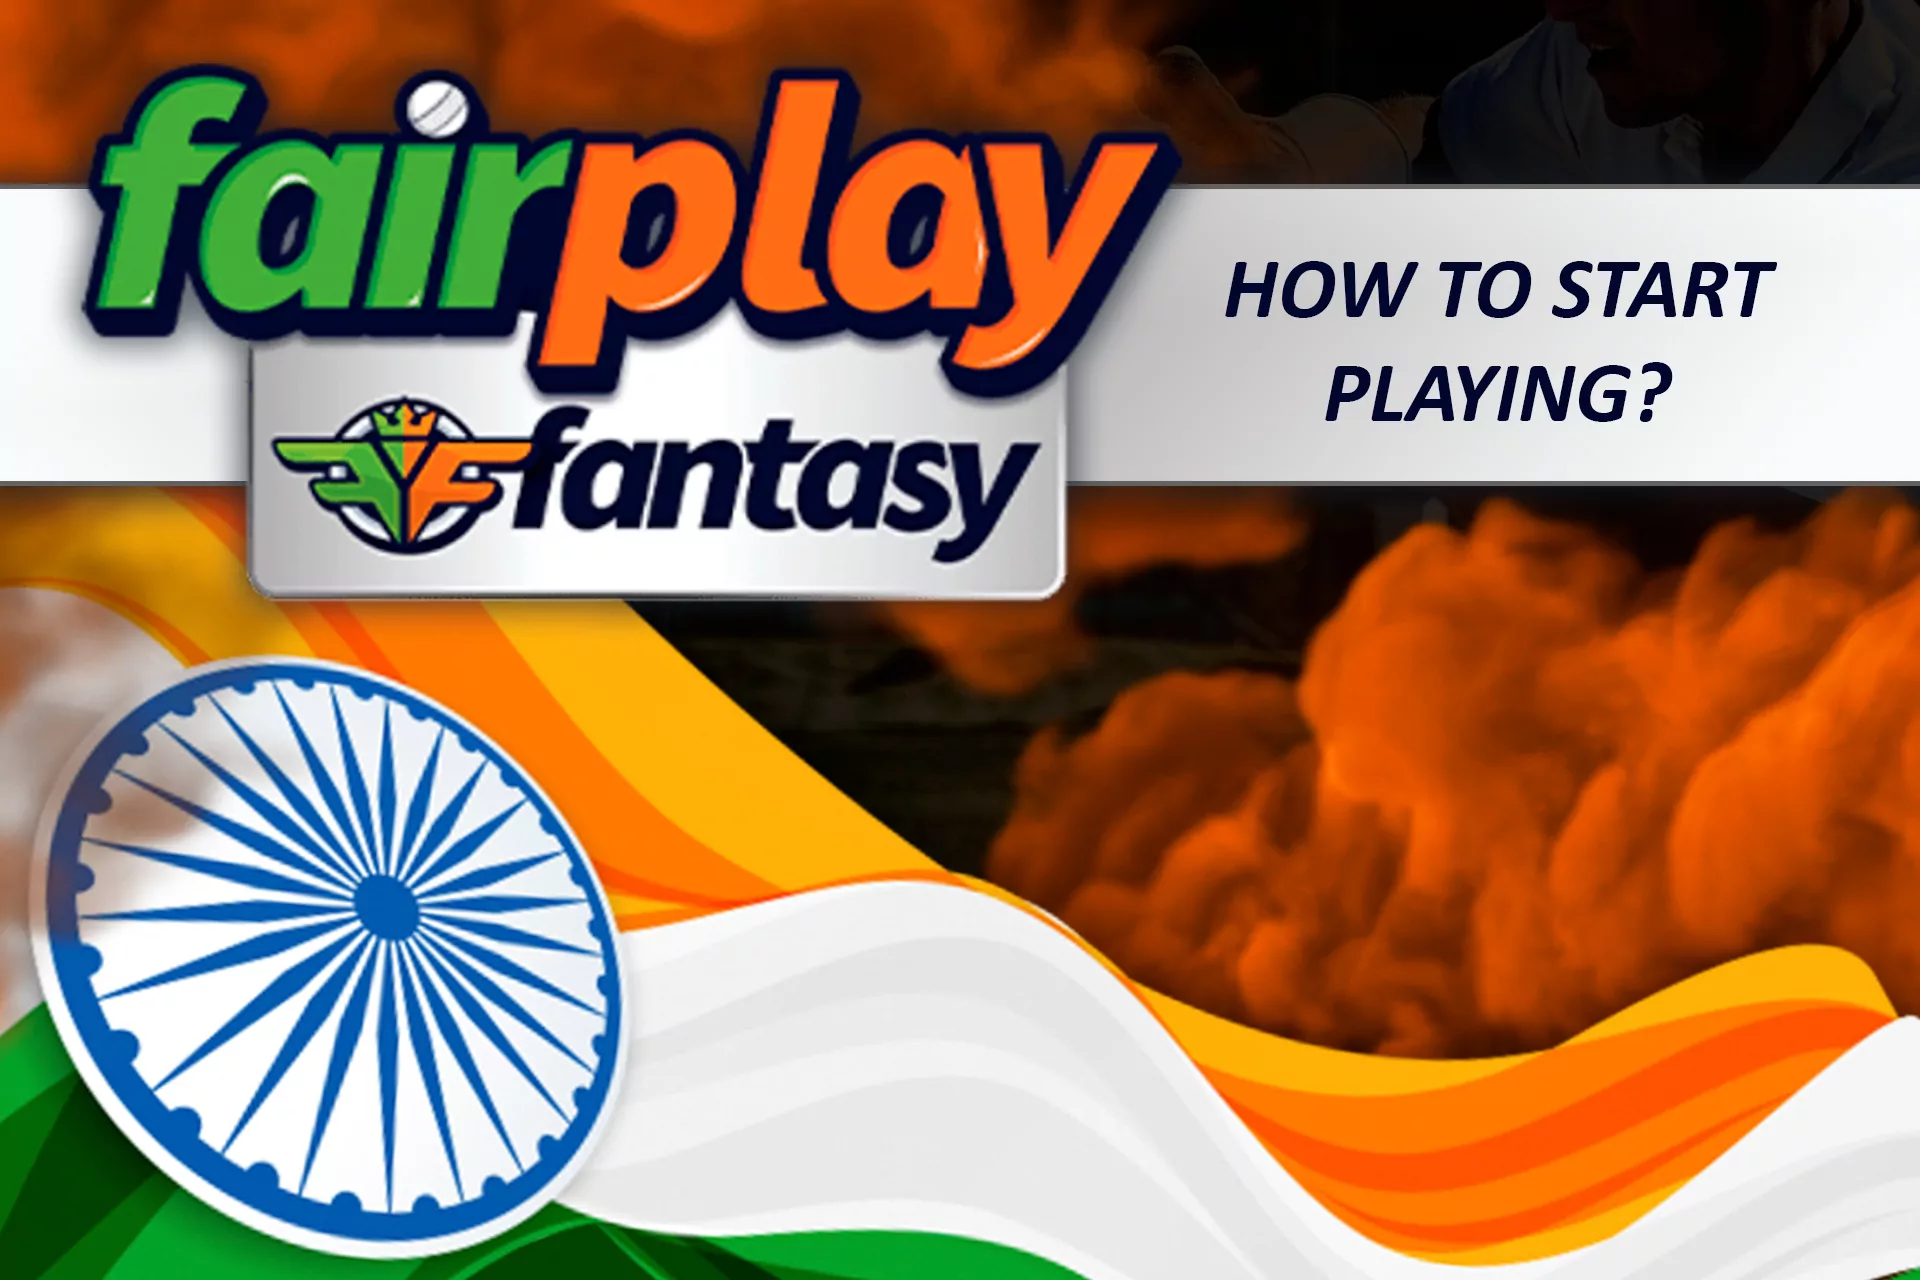 The terms and conditions for the use of the Fairplay Fantasy app are the same as for the usual Fairplay app.